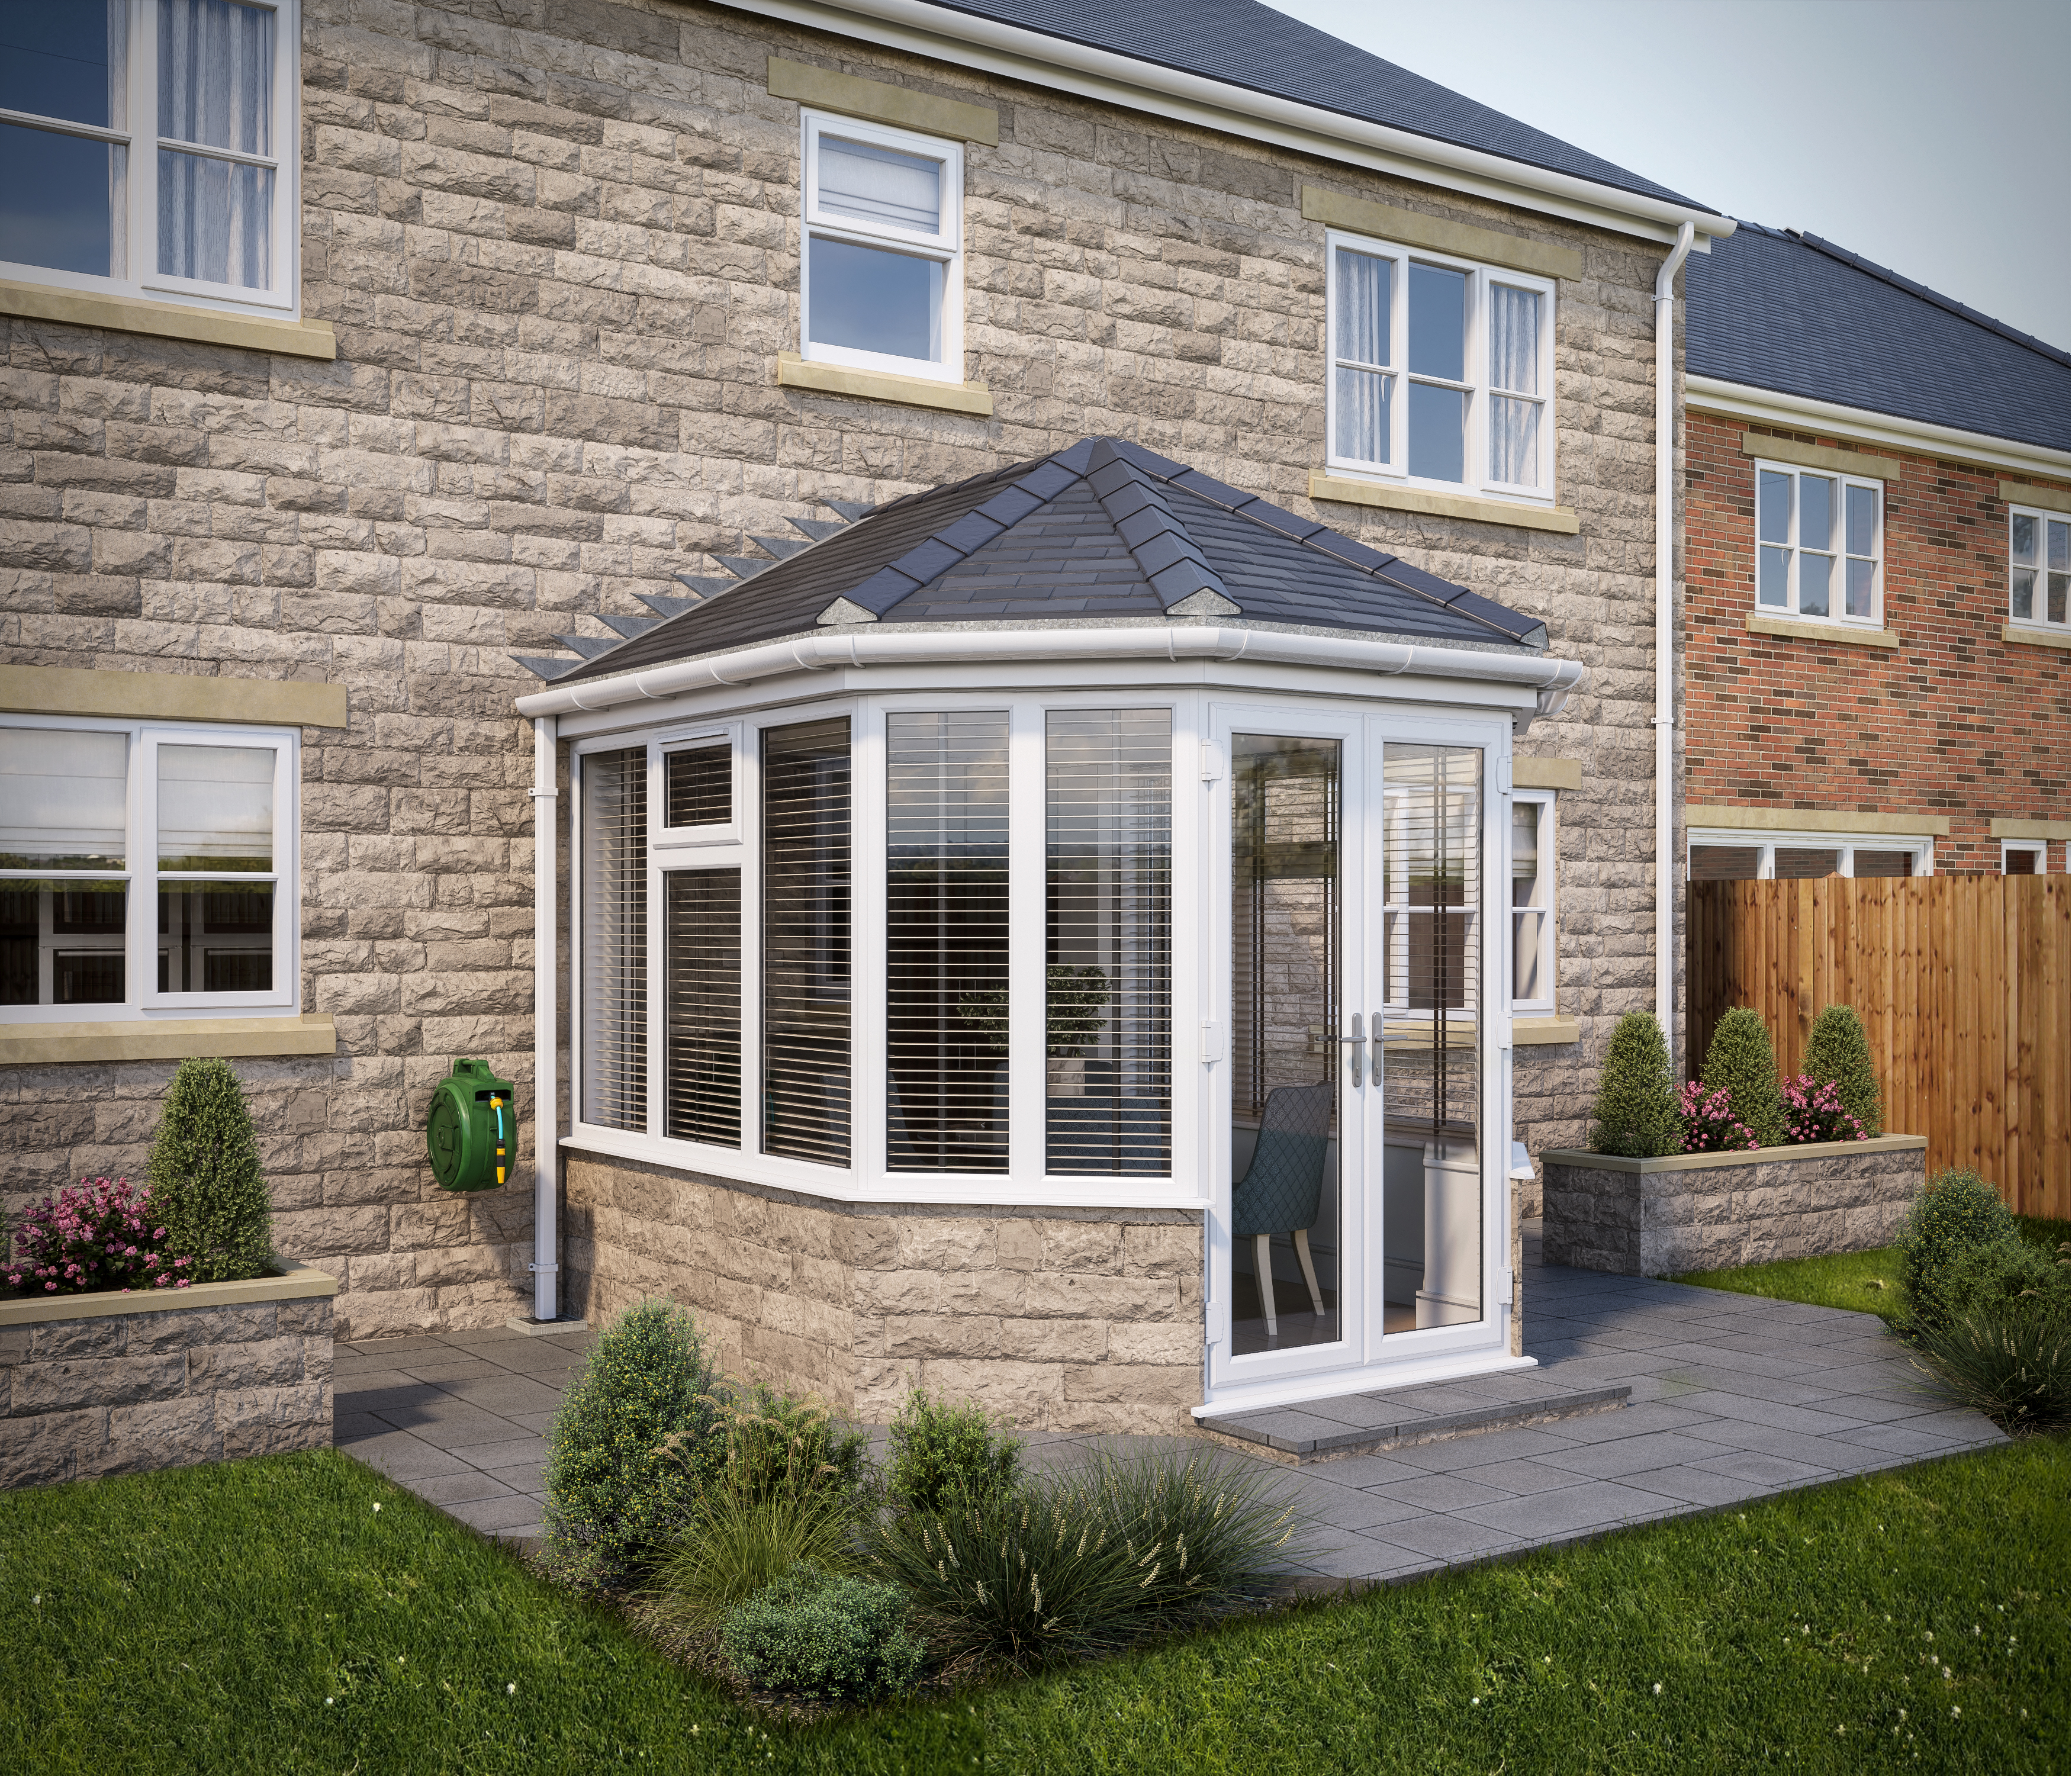 Image of SOLid Roof Victorian Conservatory White Frames Dwarf Wall with Titanium Grey Tiles - 13 x 13ft